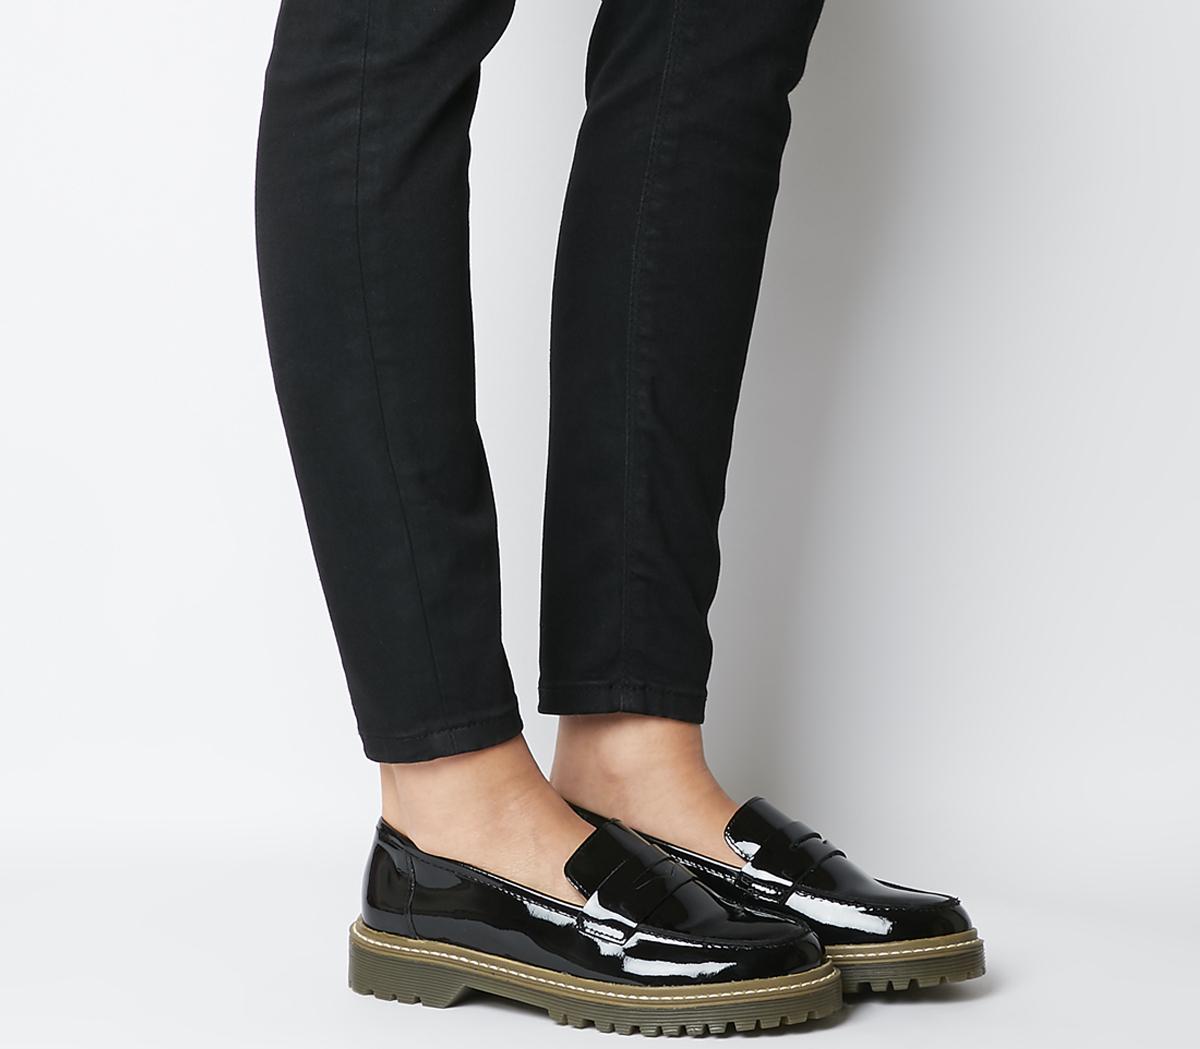 Office Frightening Loafers Black Patent 